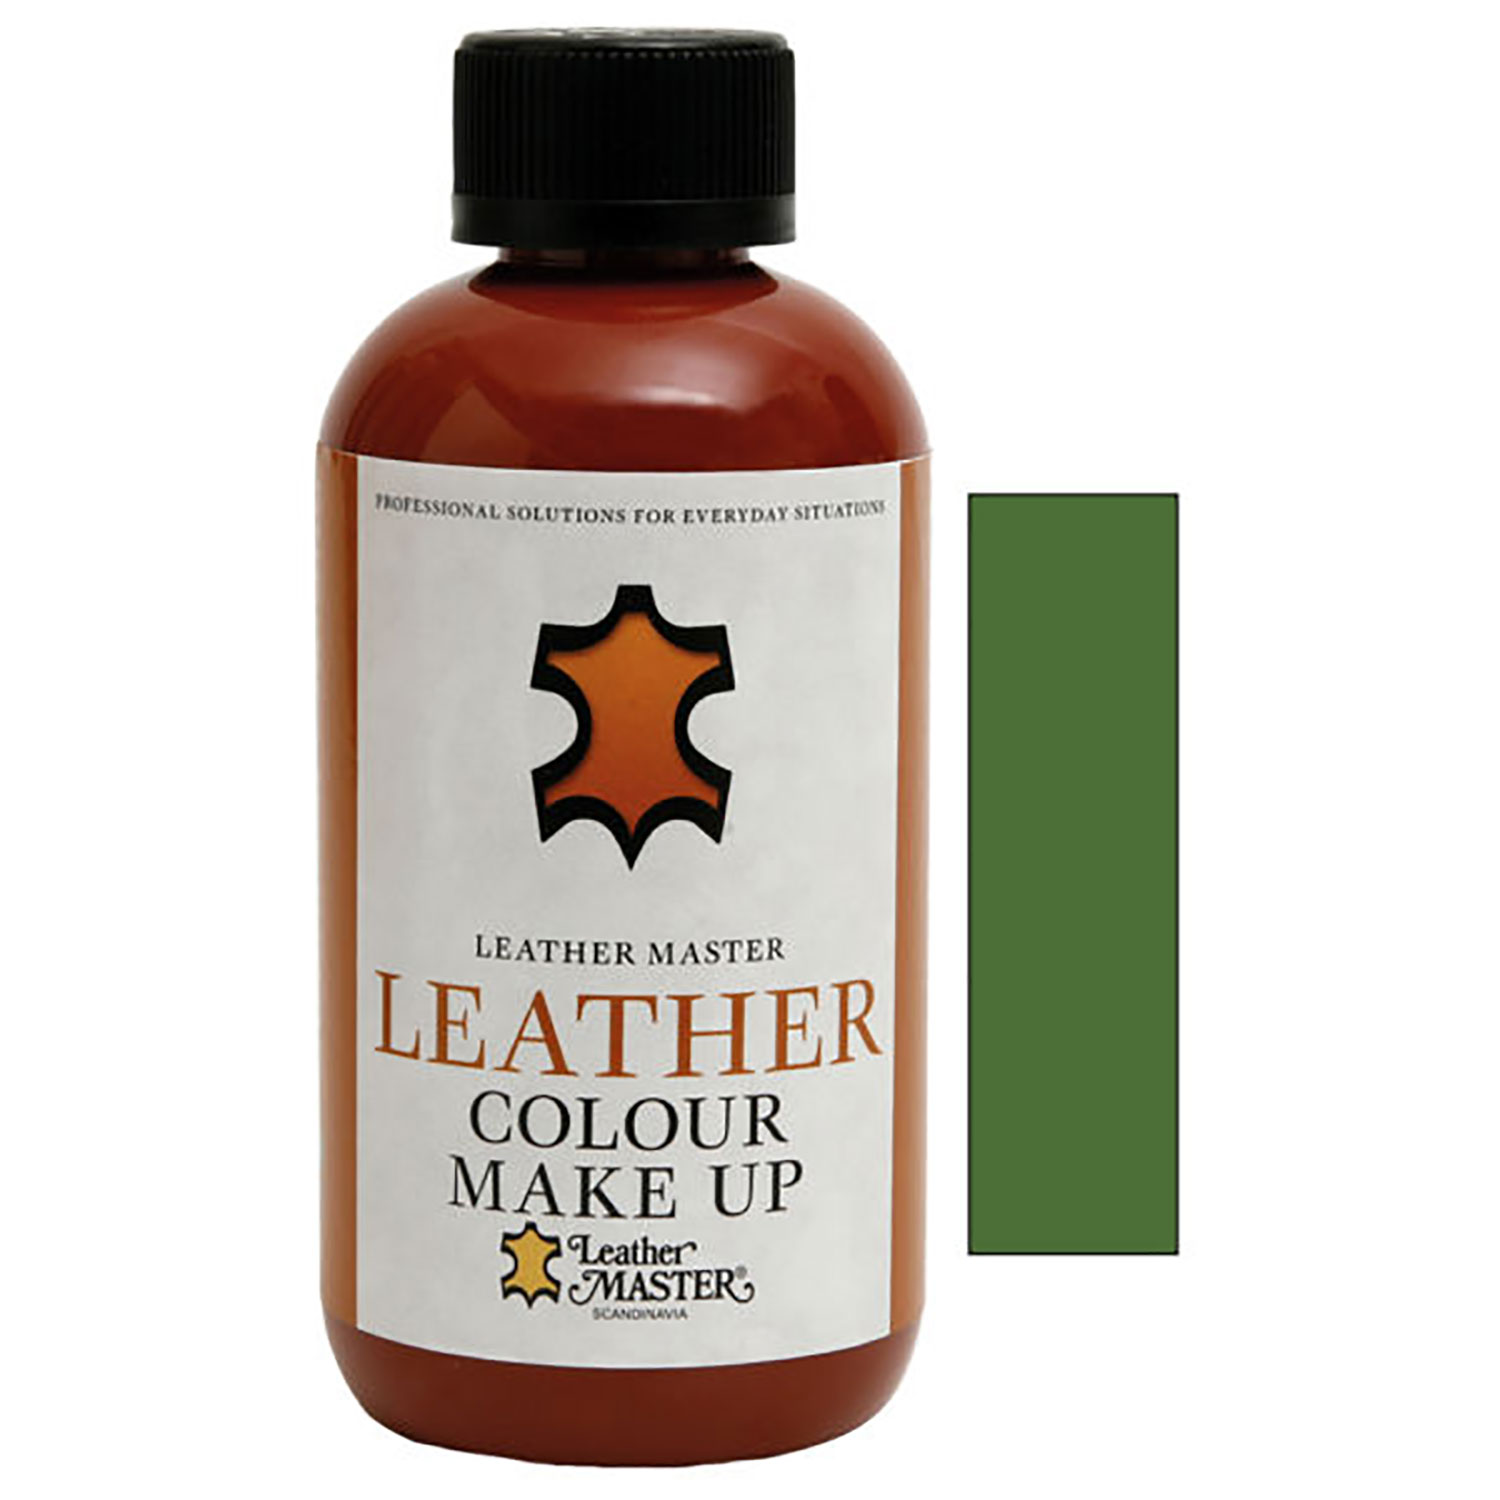 Leather Master, Colour make up - olive green 250 ml